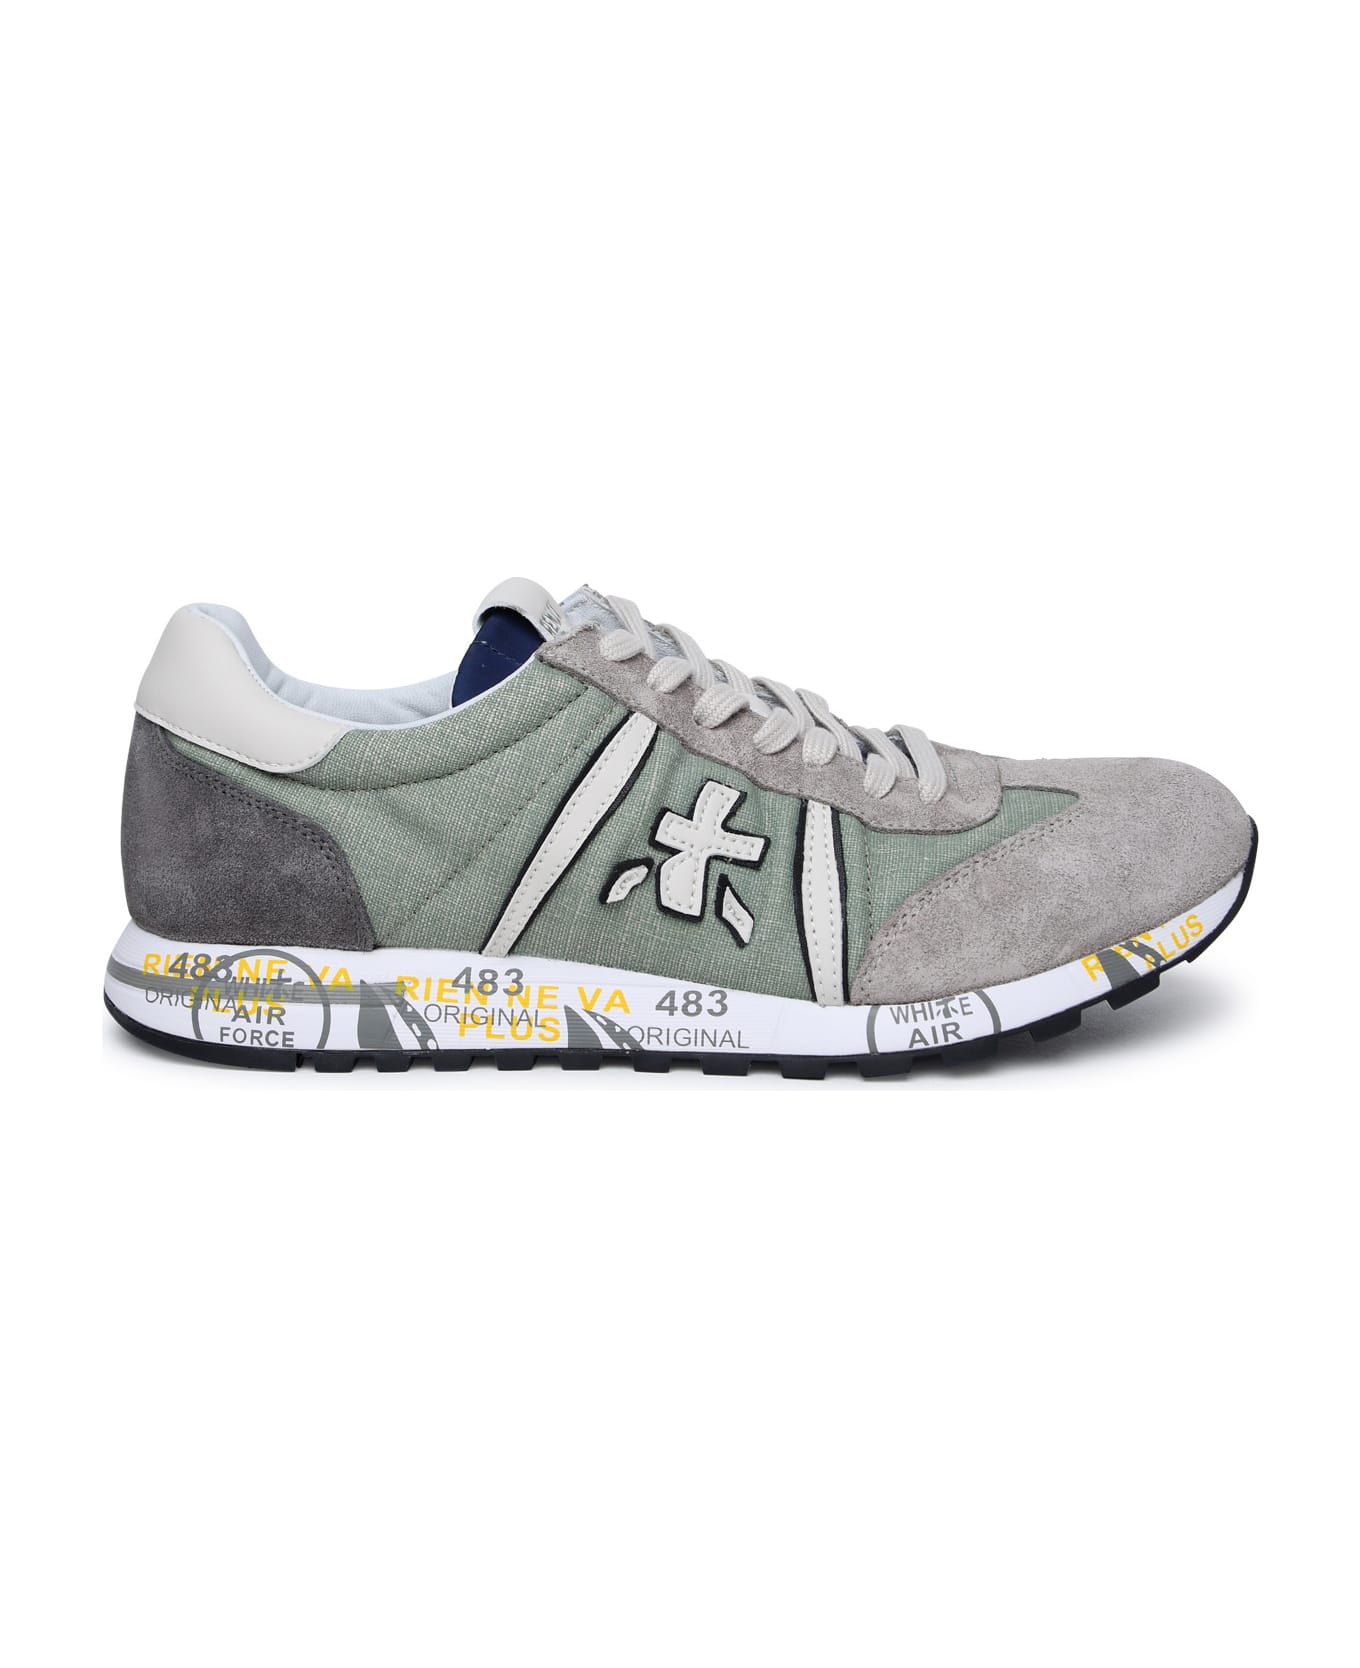 Premiata 'lucy' Green Leather And Fabric Sneakers - Green